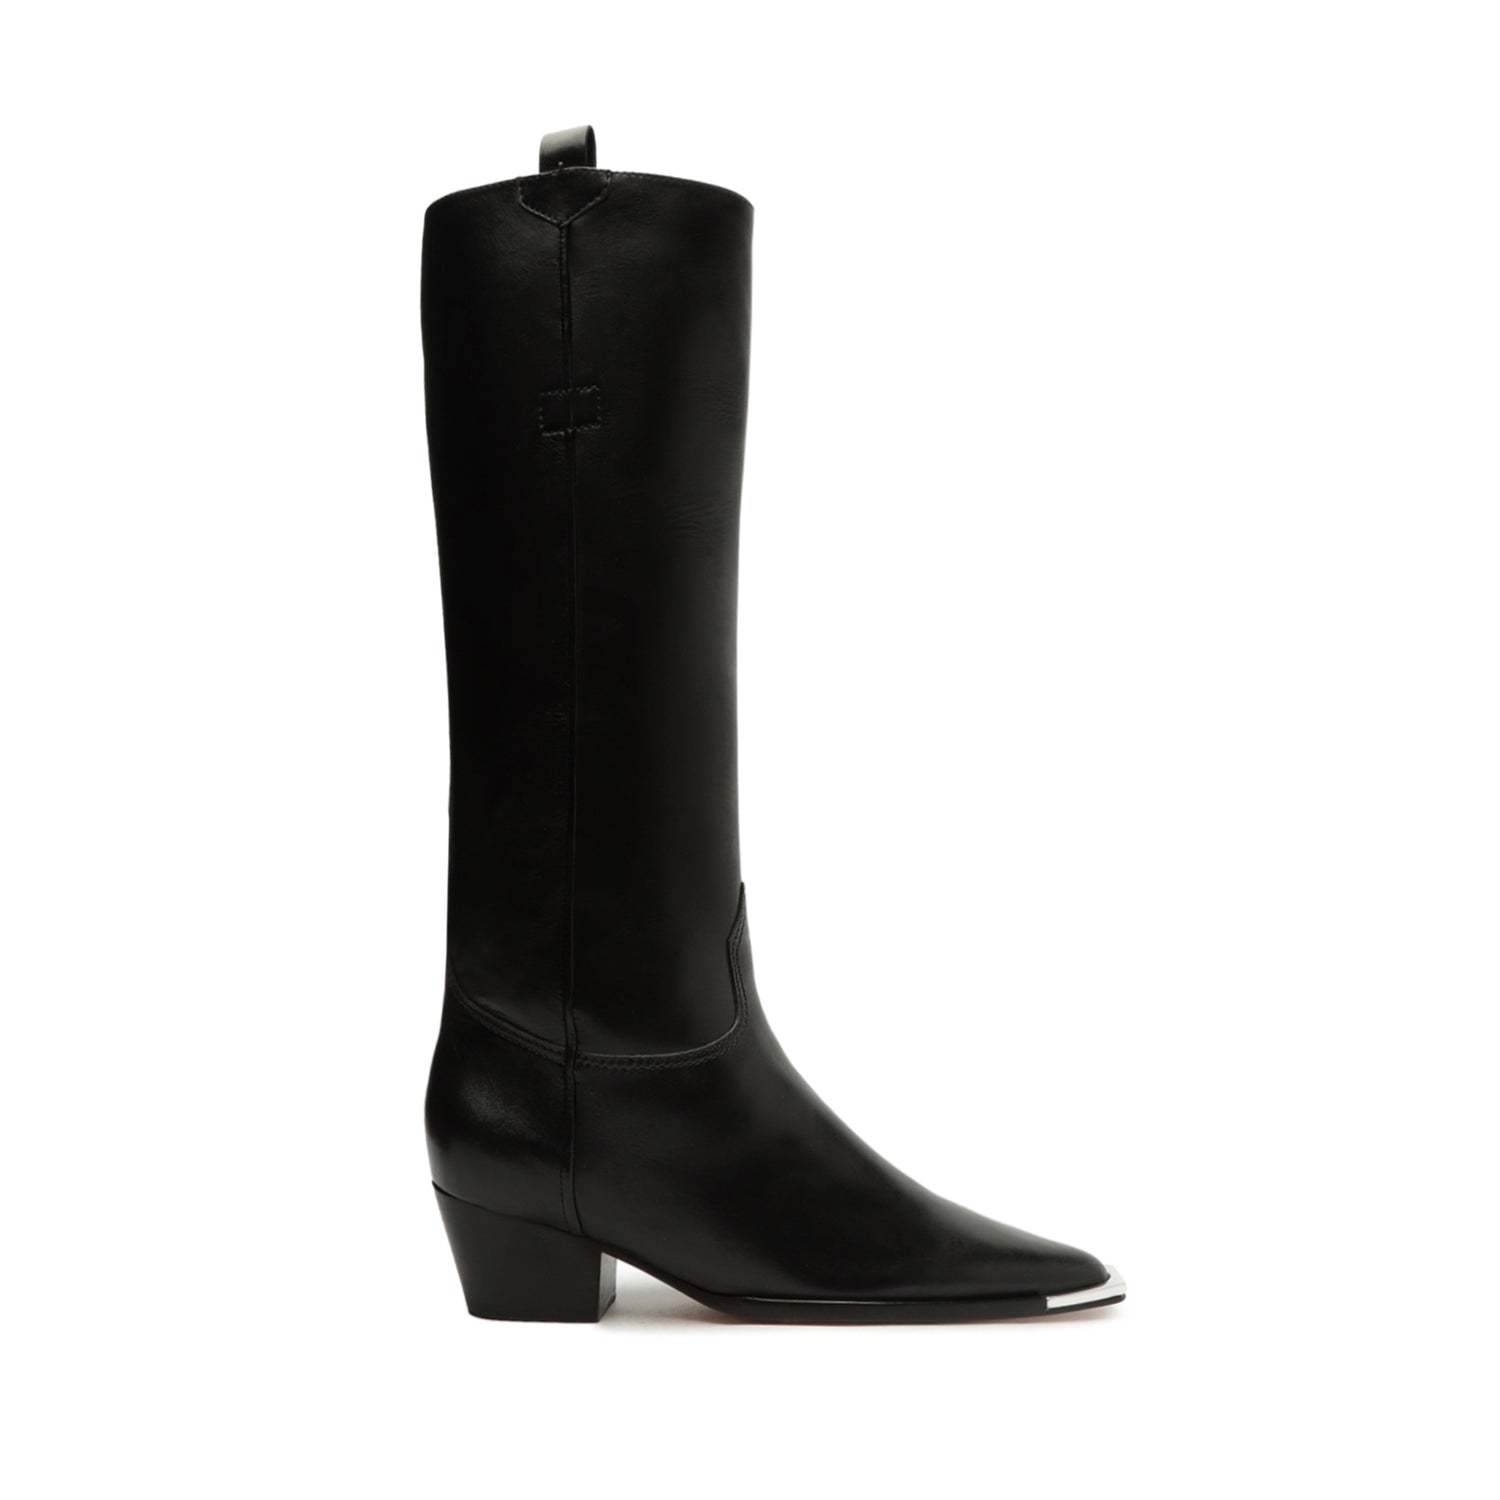 Tessie Up Calf Leather Boot Boots Fall 22 5 Black Calf Leather - Schutz Shoes